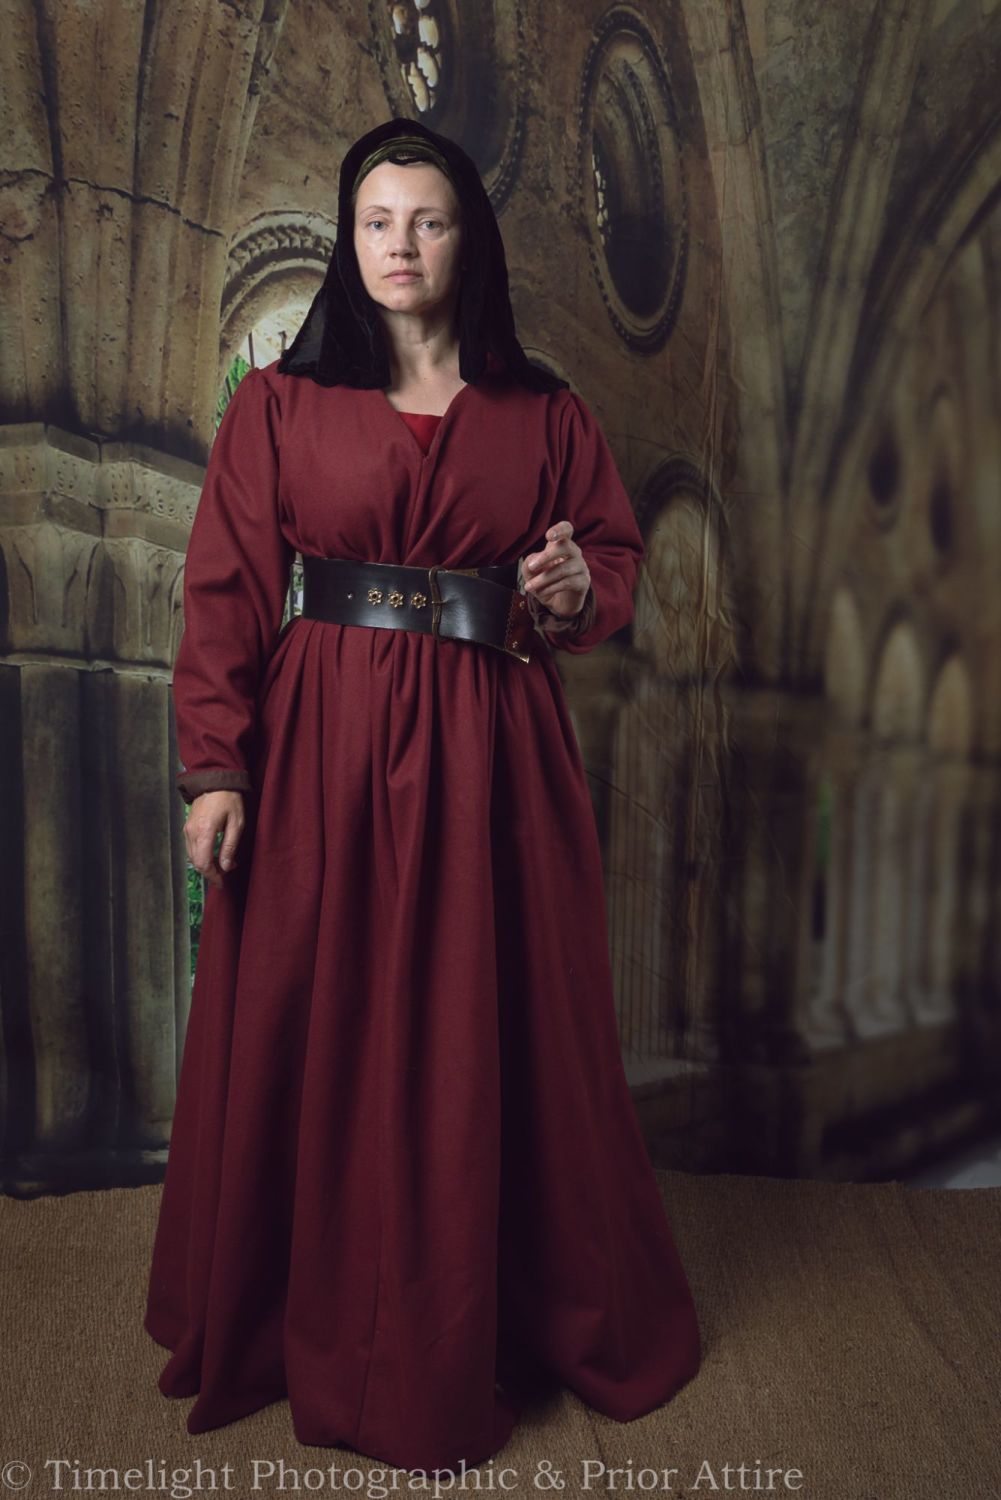  Medieval dress, middle class, 15th Century 